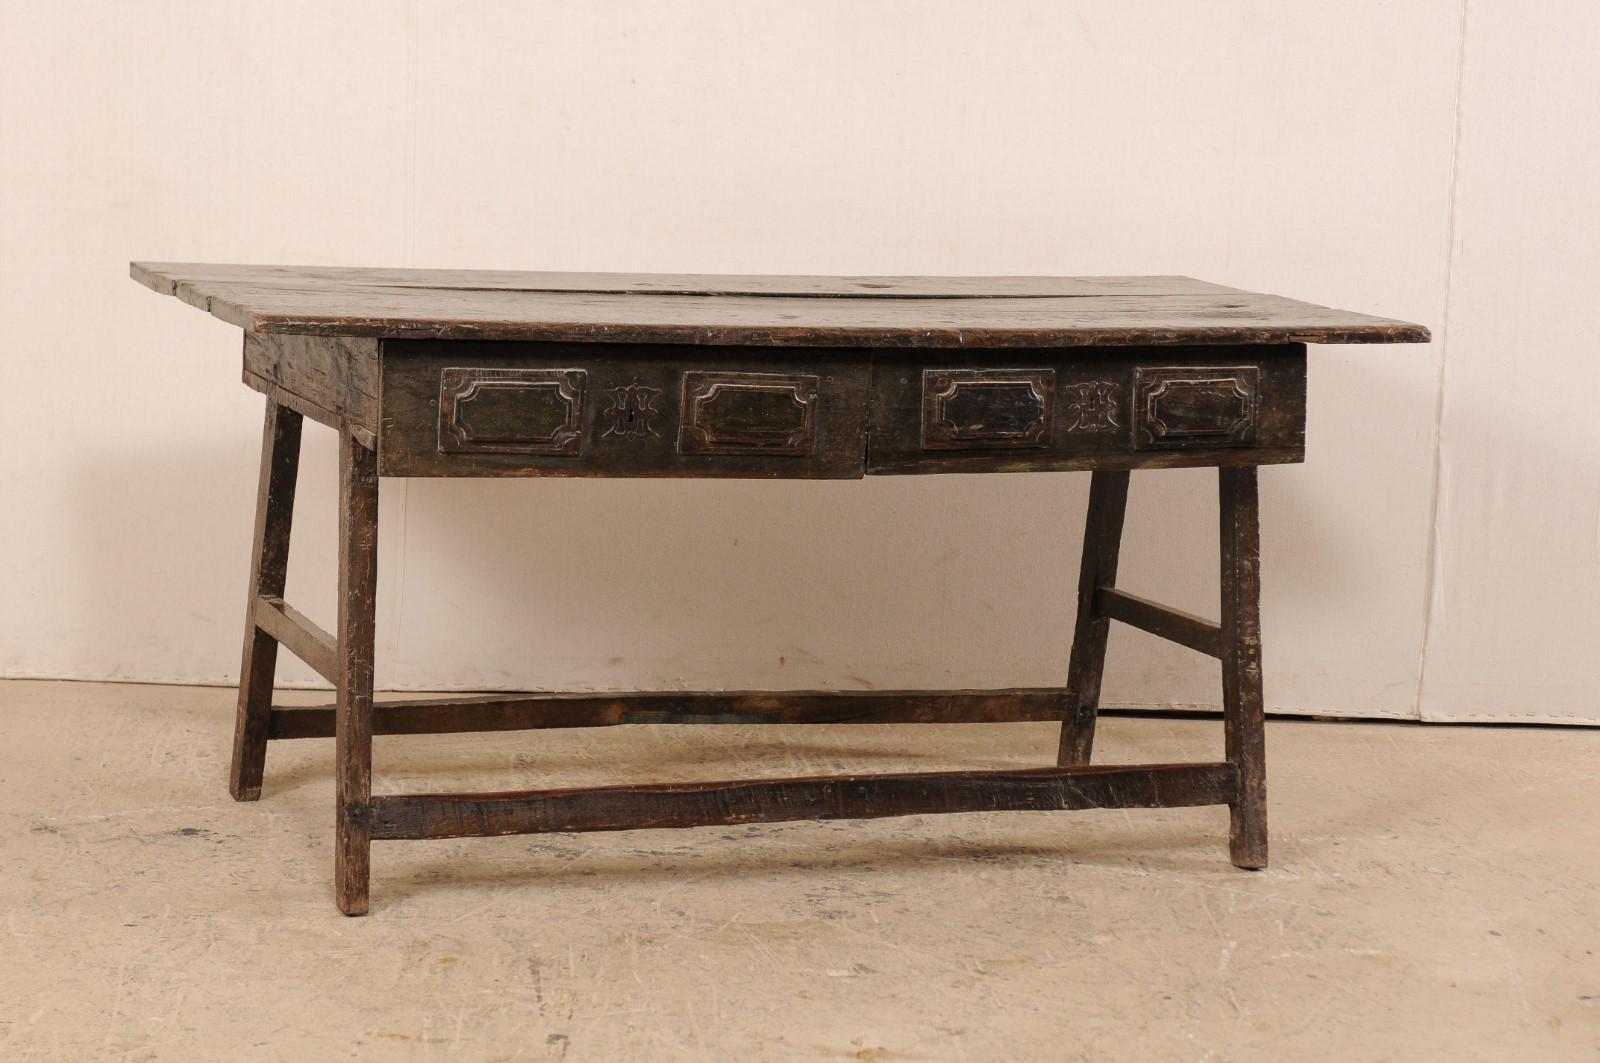 A wonderfully rustic Brazilian two-drawer console table from the late 17th-early 18th century. This antique table from Brazil is constructed of peroba wood, which is a tropical native hardwood, 35% harder than oak. The table has a rectangular-shaped